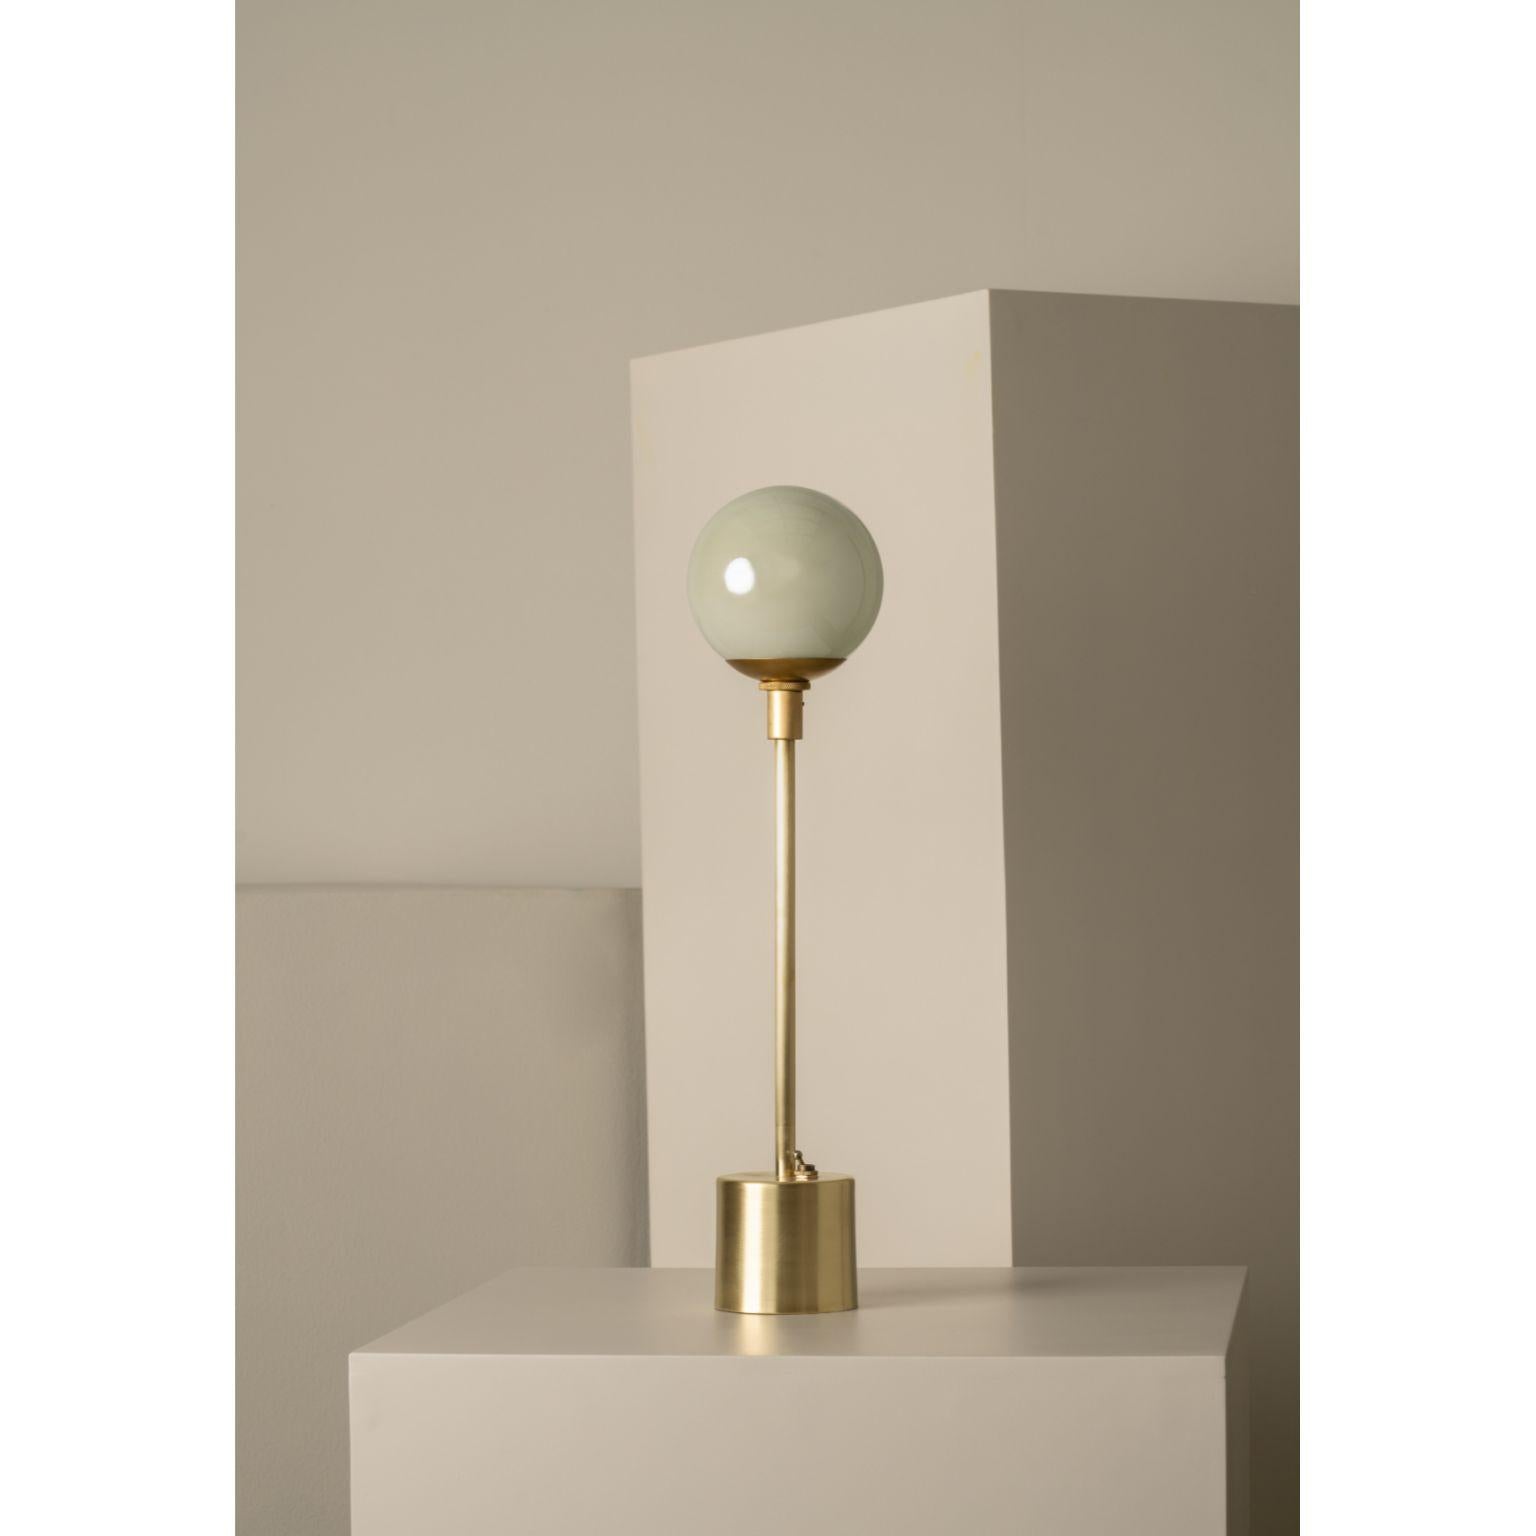 Átomo White Blown Glass and Brass Table Lamp by Isabel Moncada
Dimensions: Ø 13 x H 33 cm.
Materials: Brass, steel and blown glass.

Átomo is perfect to give a touch of silent light, almost like a sparkle. The simplicity of its globe is enough, a